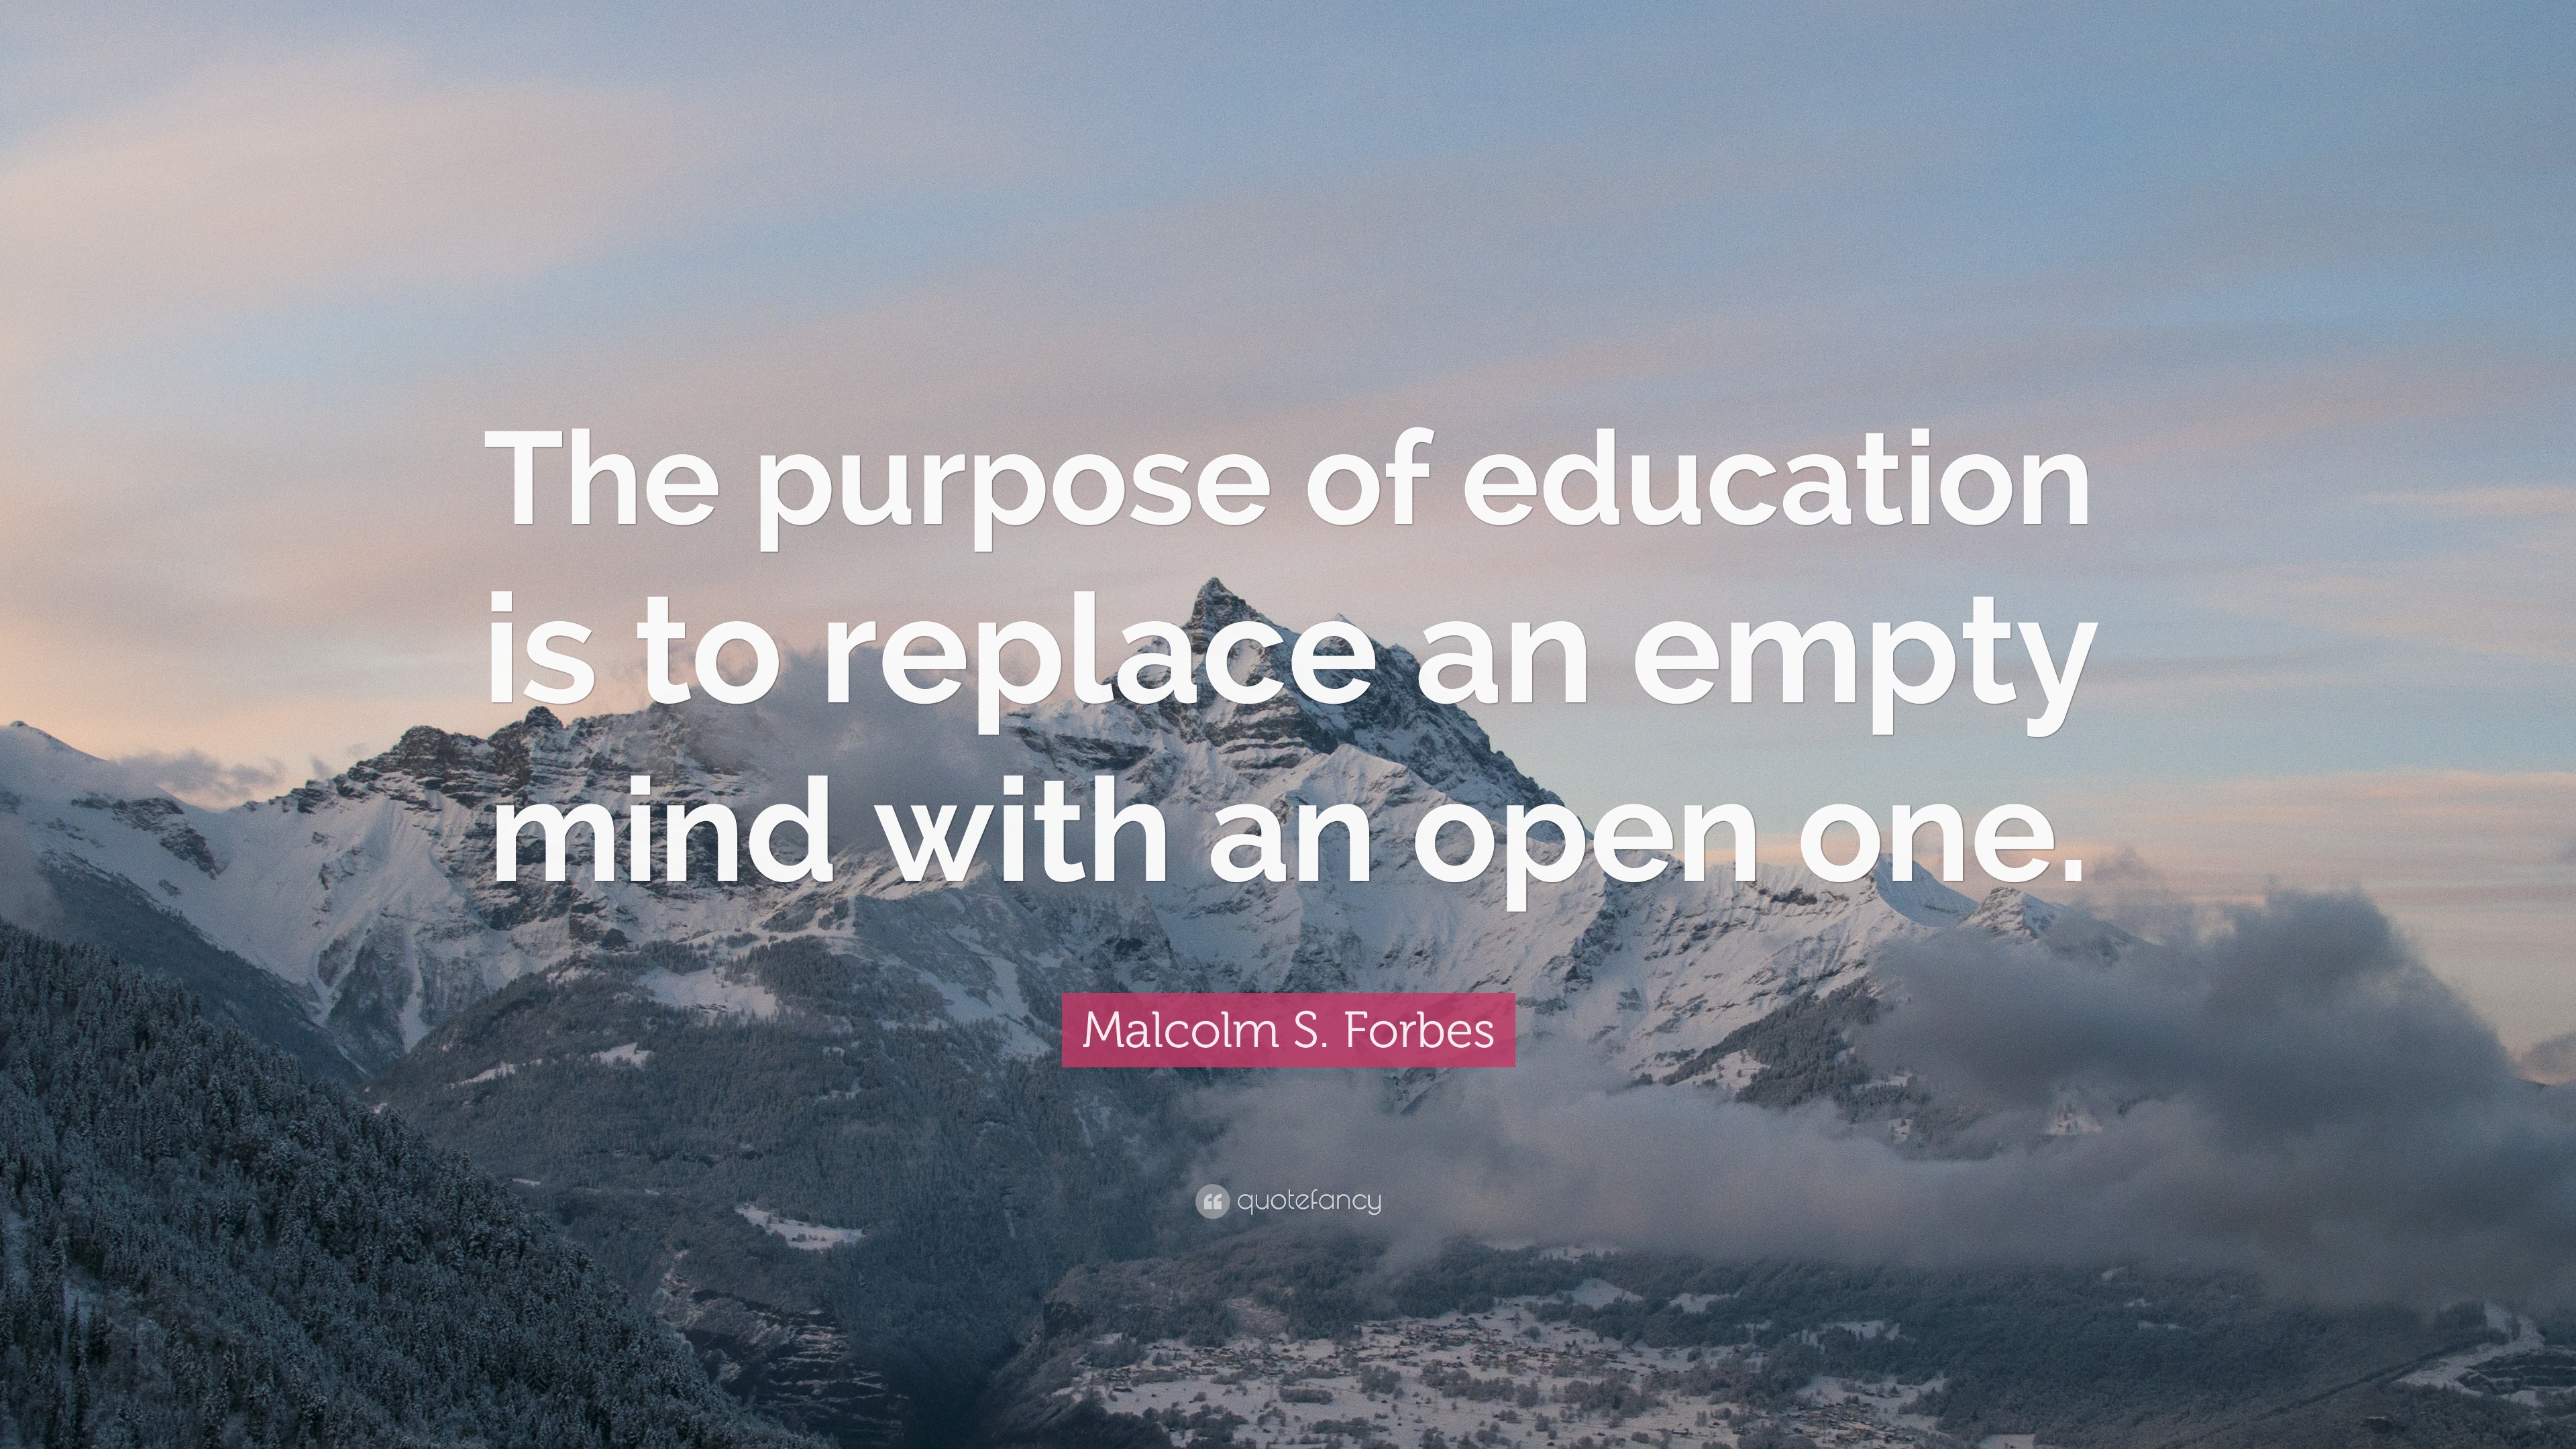 Read Complete 95 Most Inspiring Education Quotes That Will Make You Love Learning Again